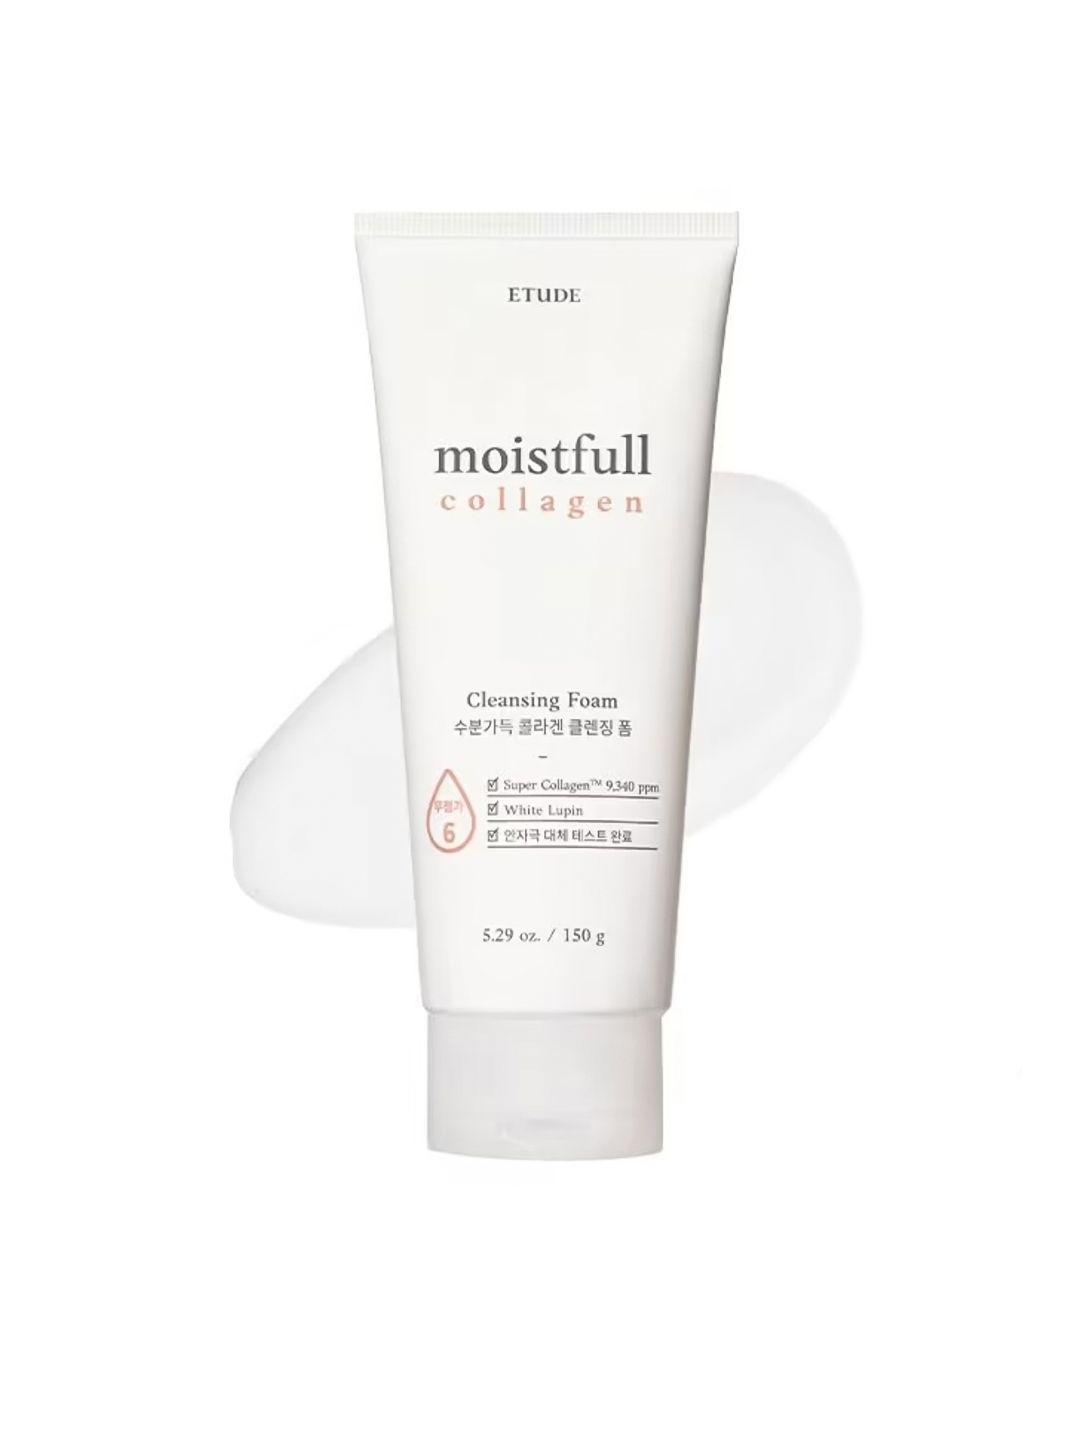 etude moistfull collagen cleansing foam with white lupin - 80 ml